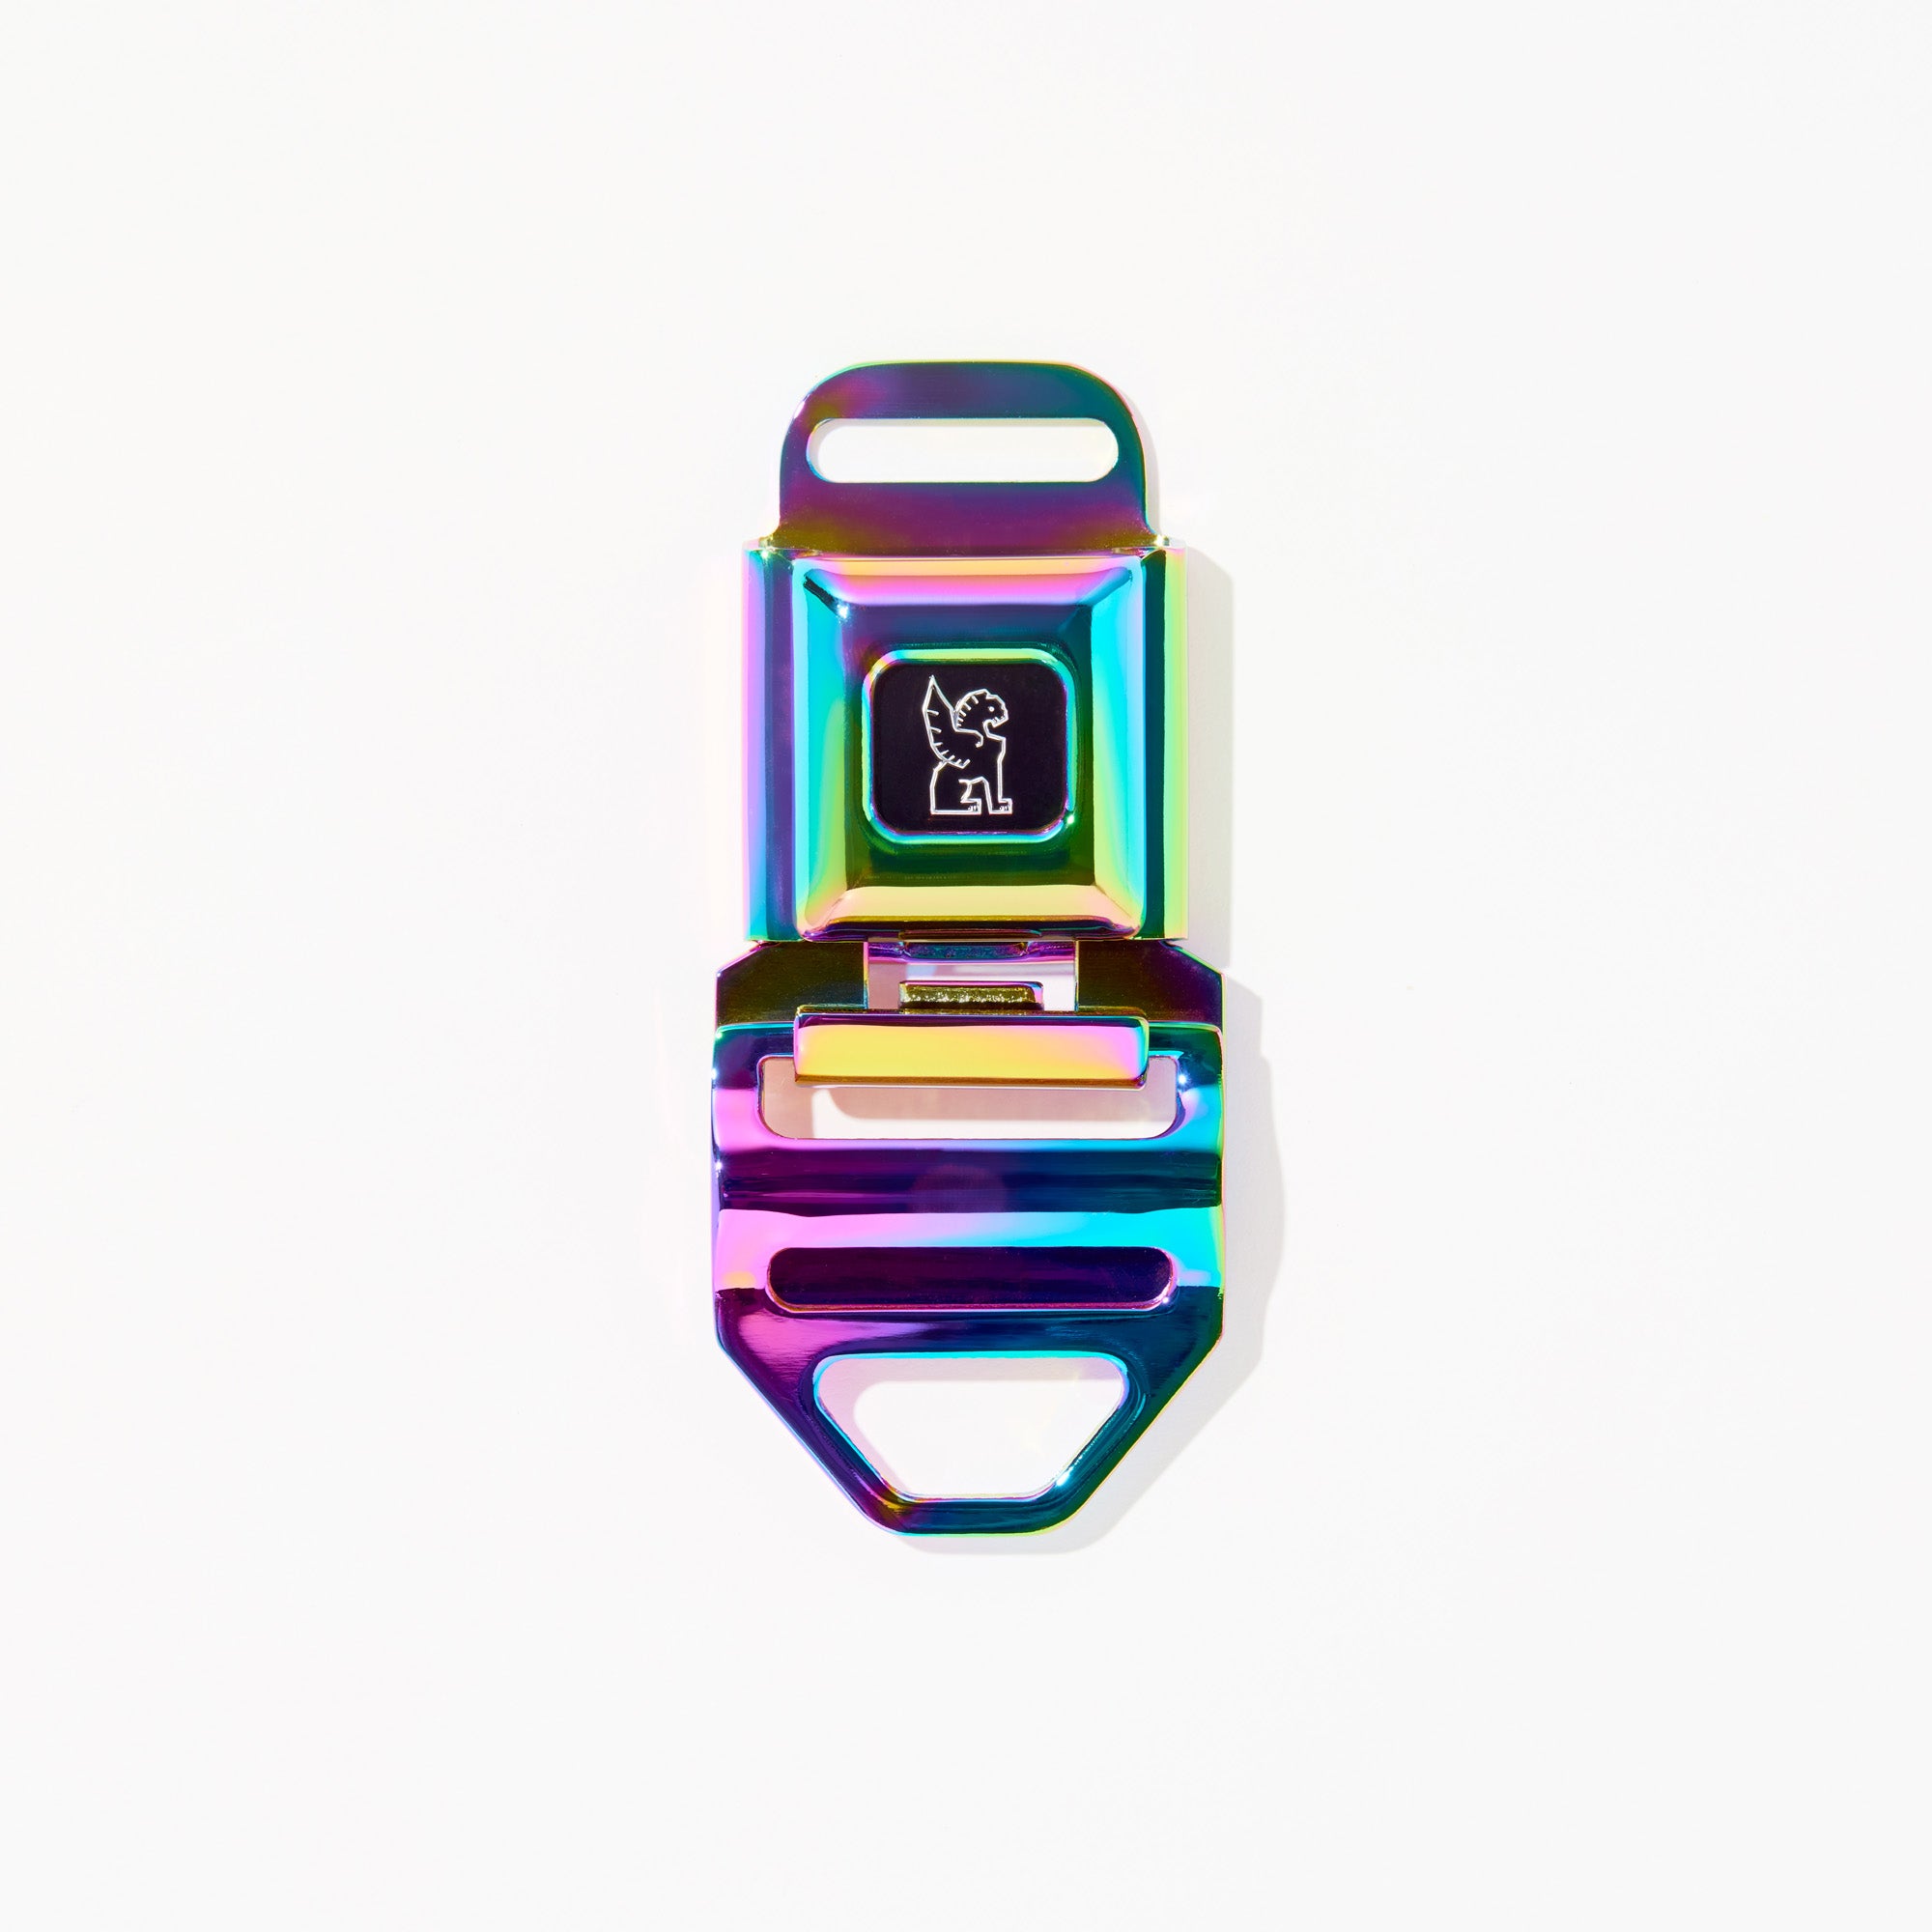 Iconic Chrome MD size seatbelt buckle in rainbow #color_rainbow